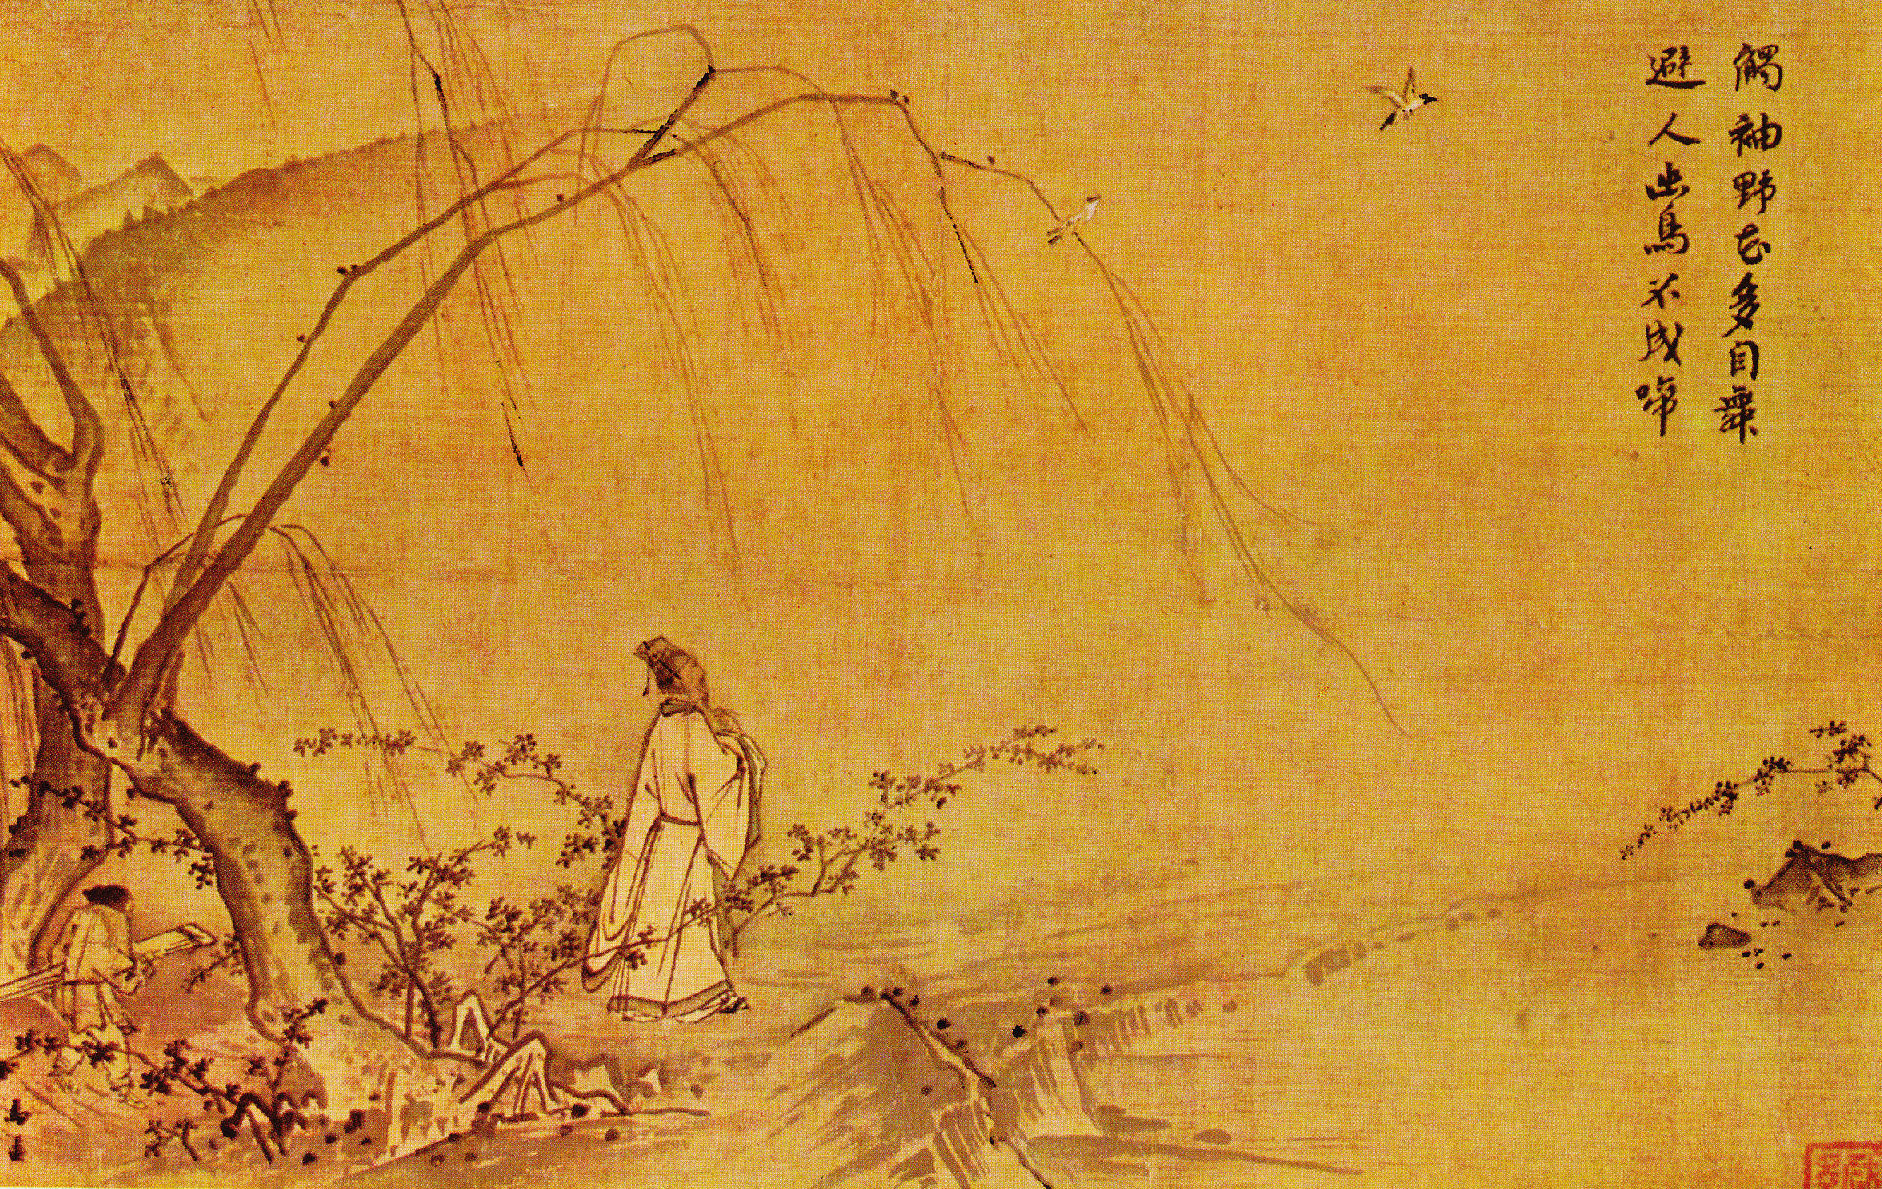 spectacled painting of monk staring at his path